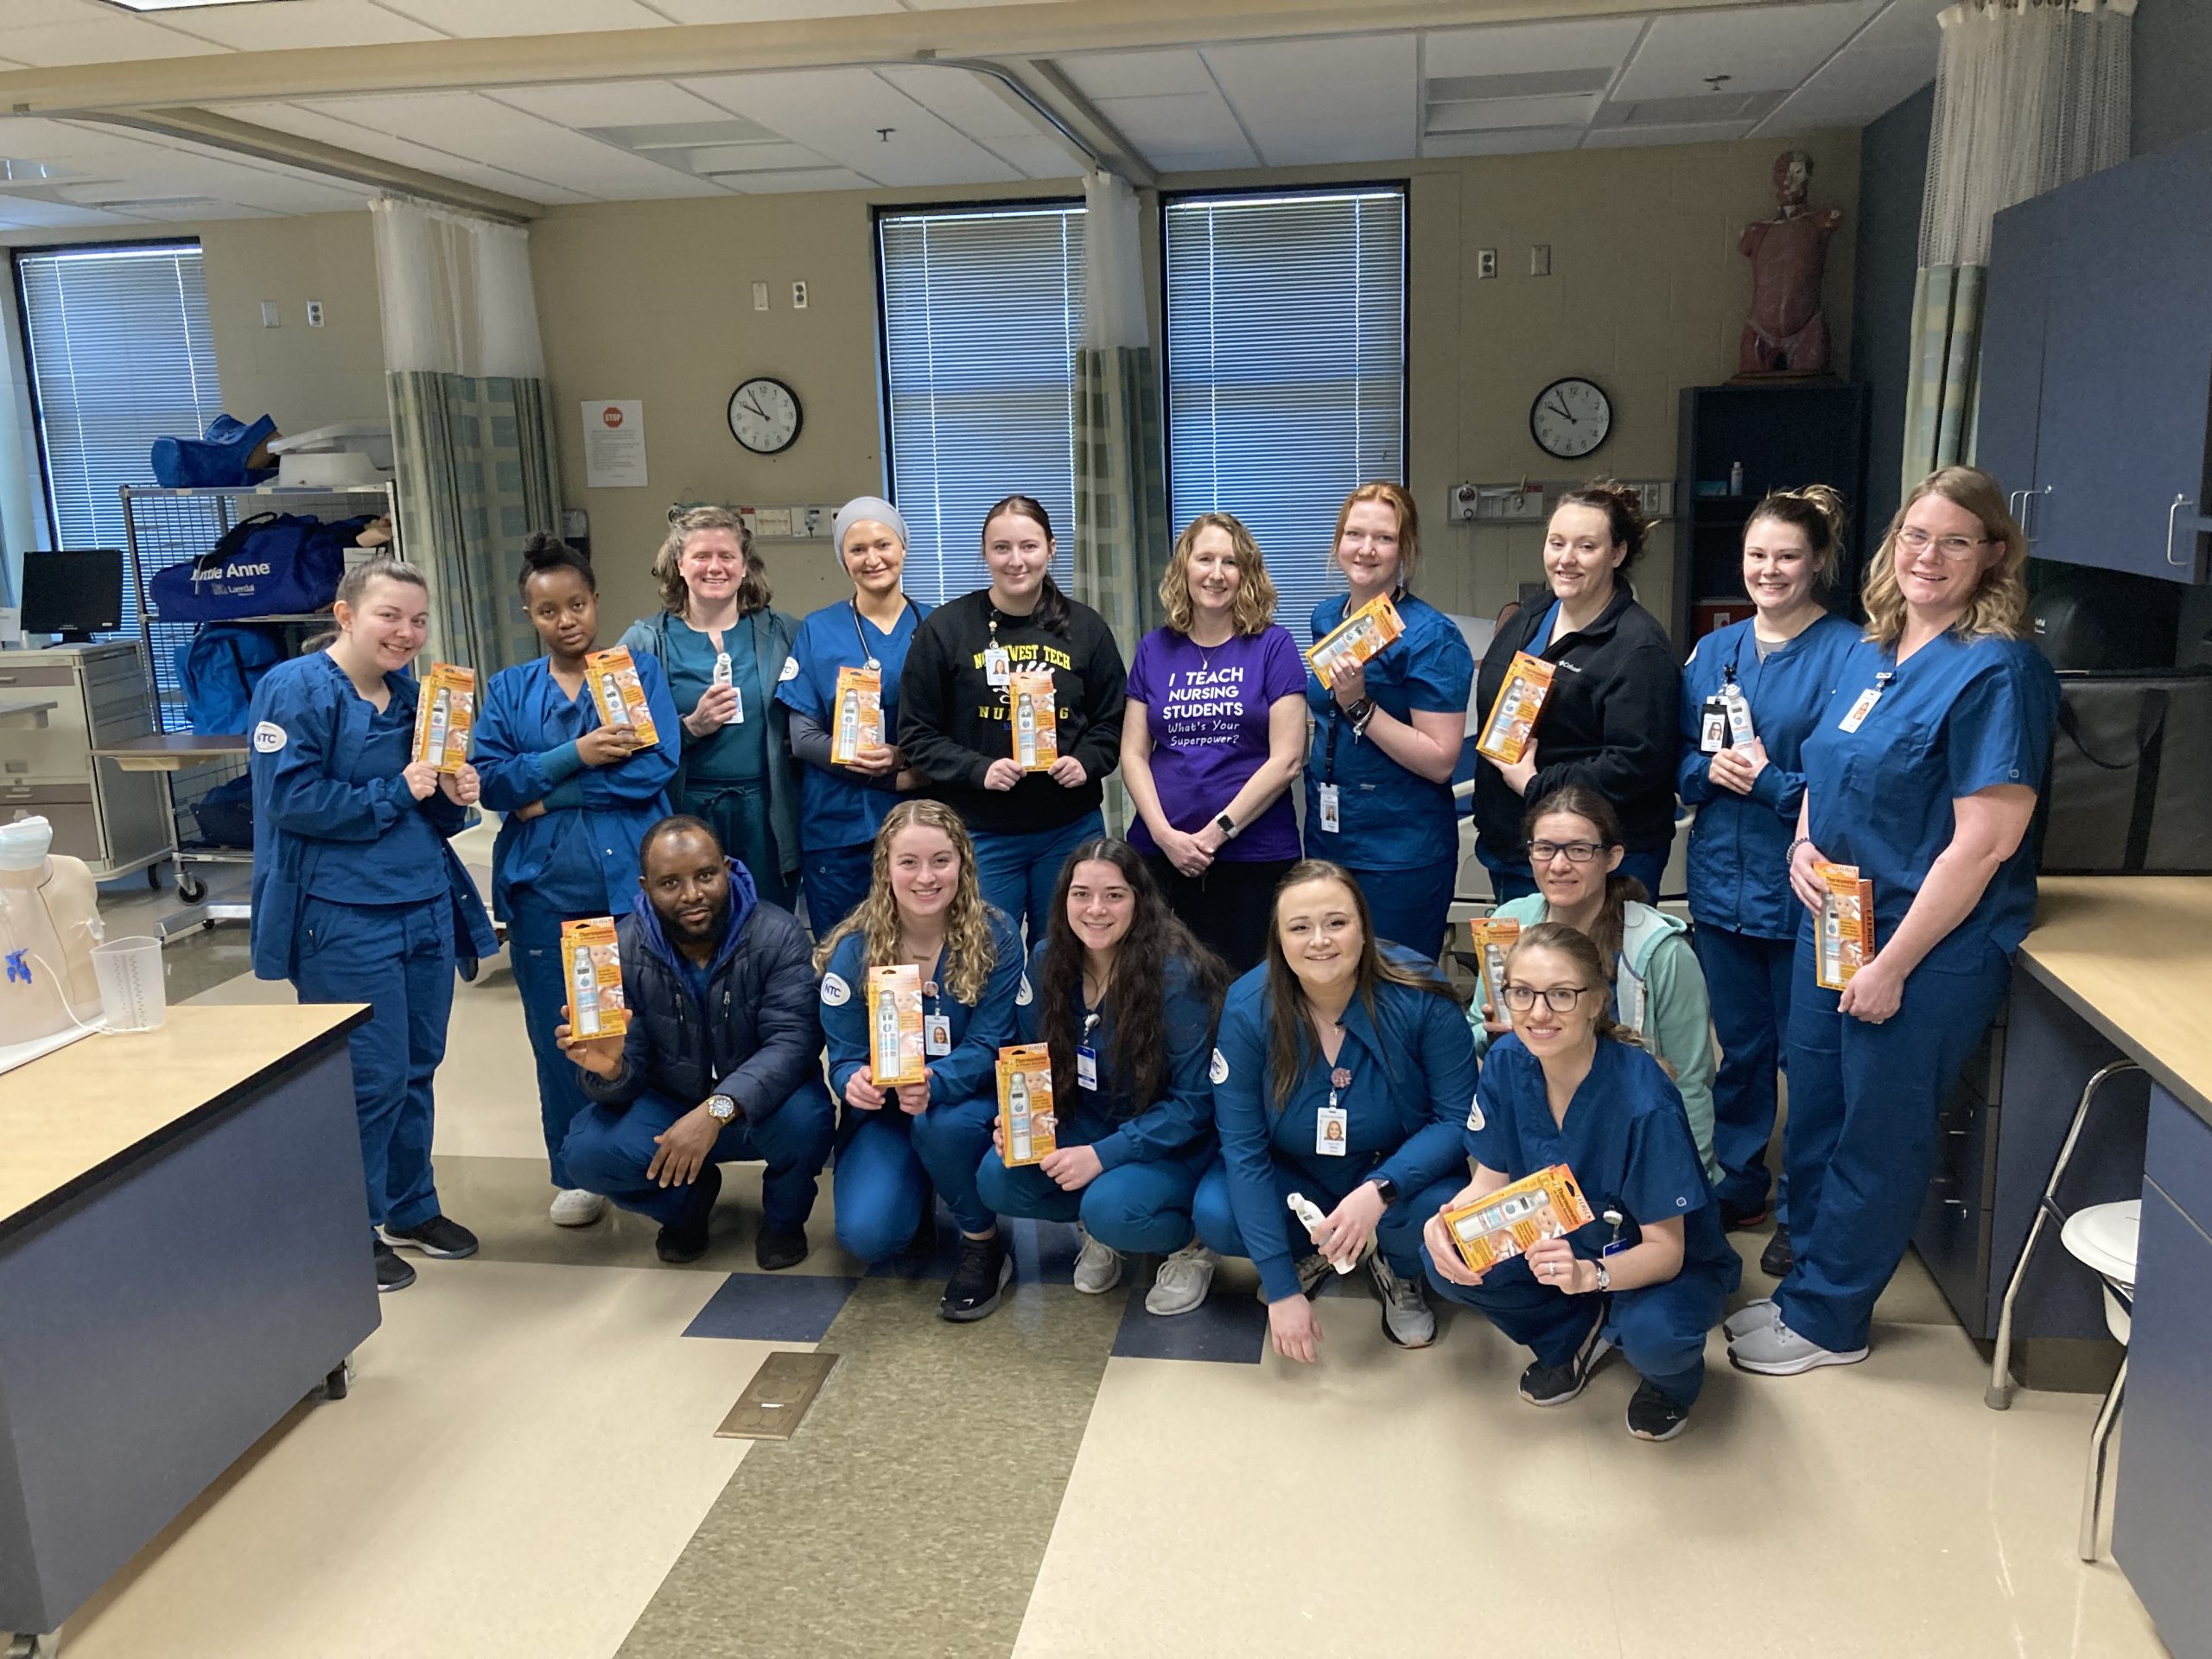 NTC nursing students pose with thermometers donated by Exergen Corporation.